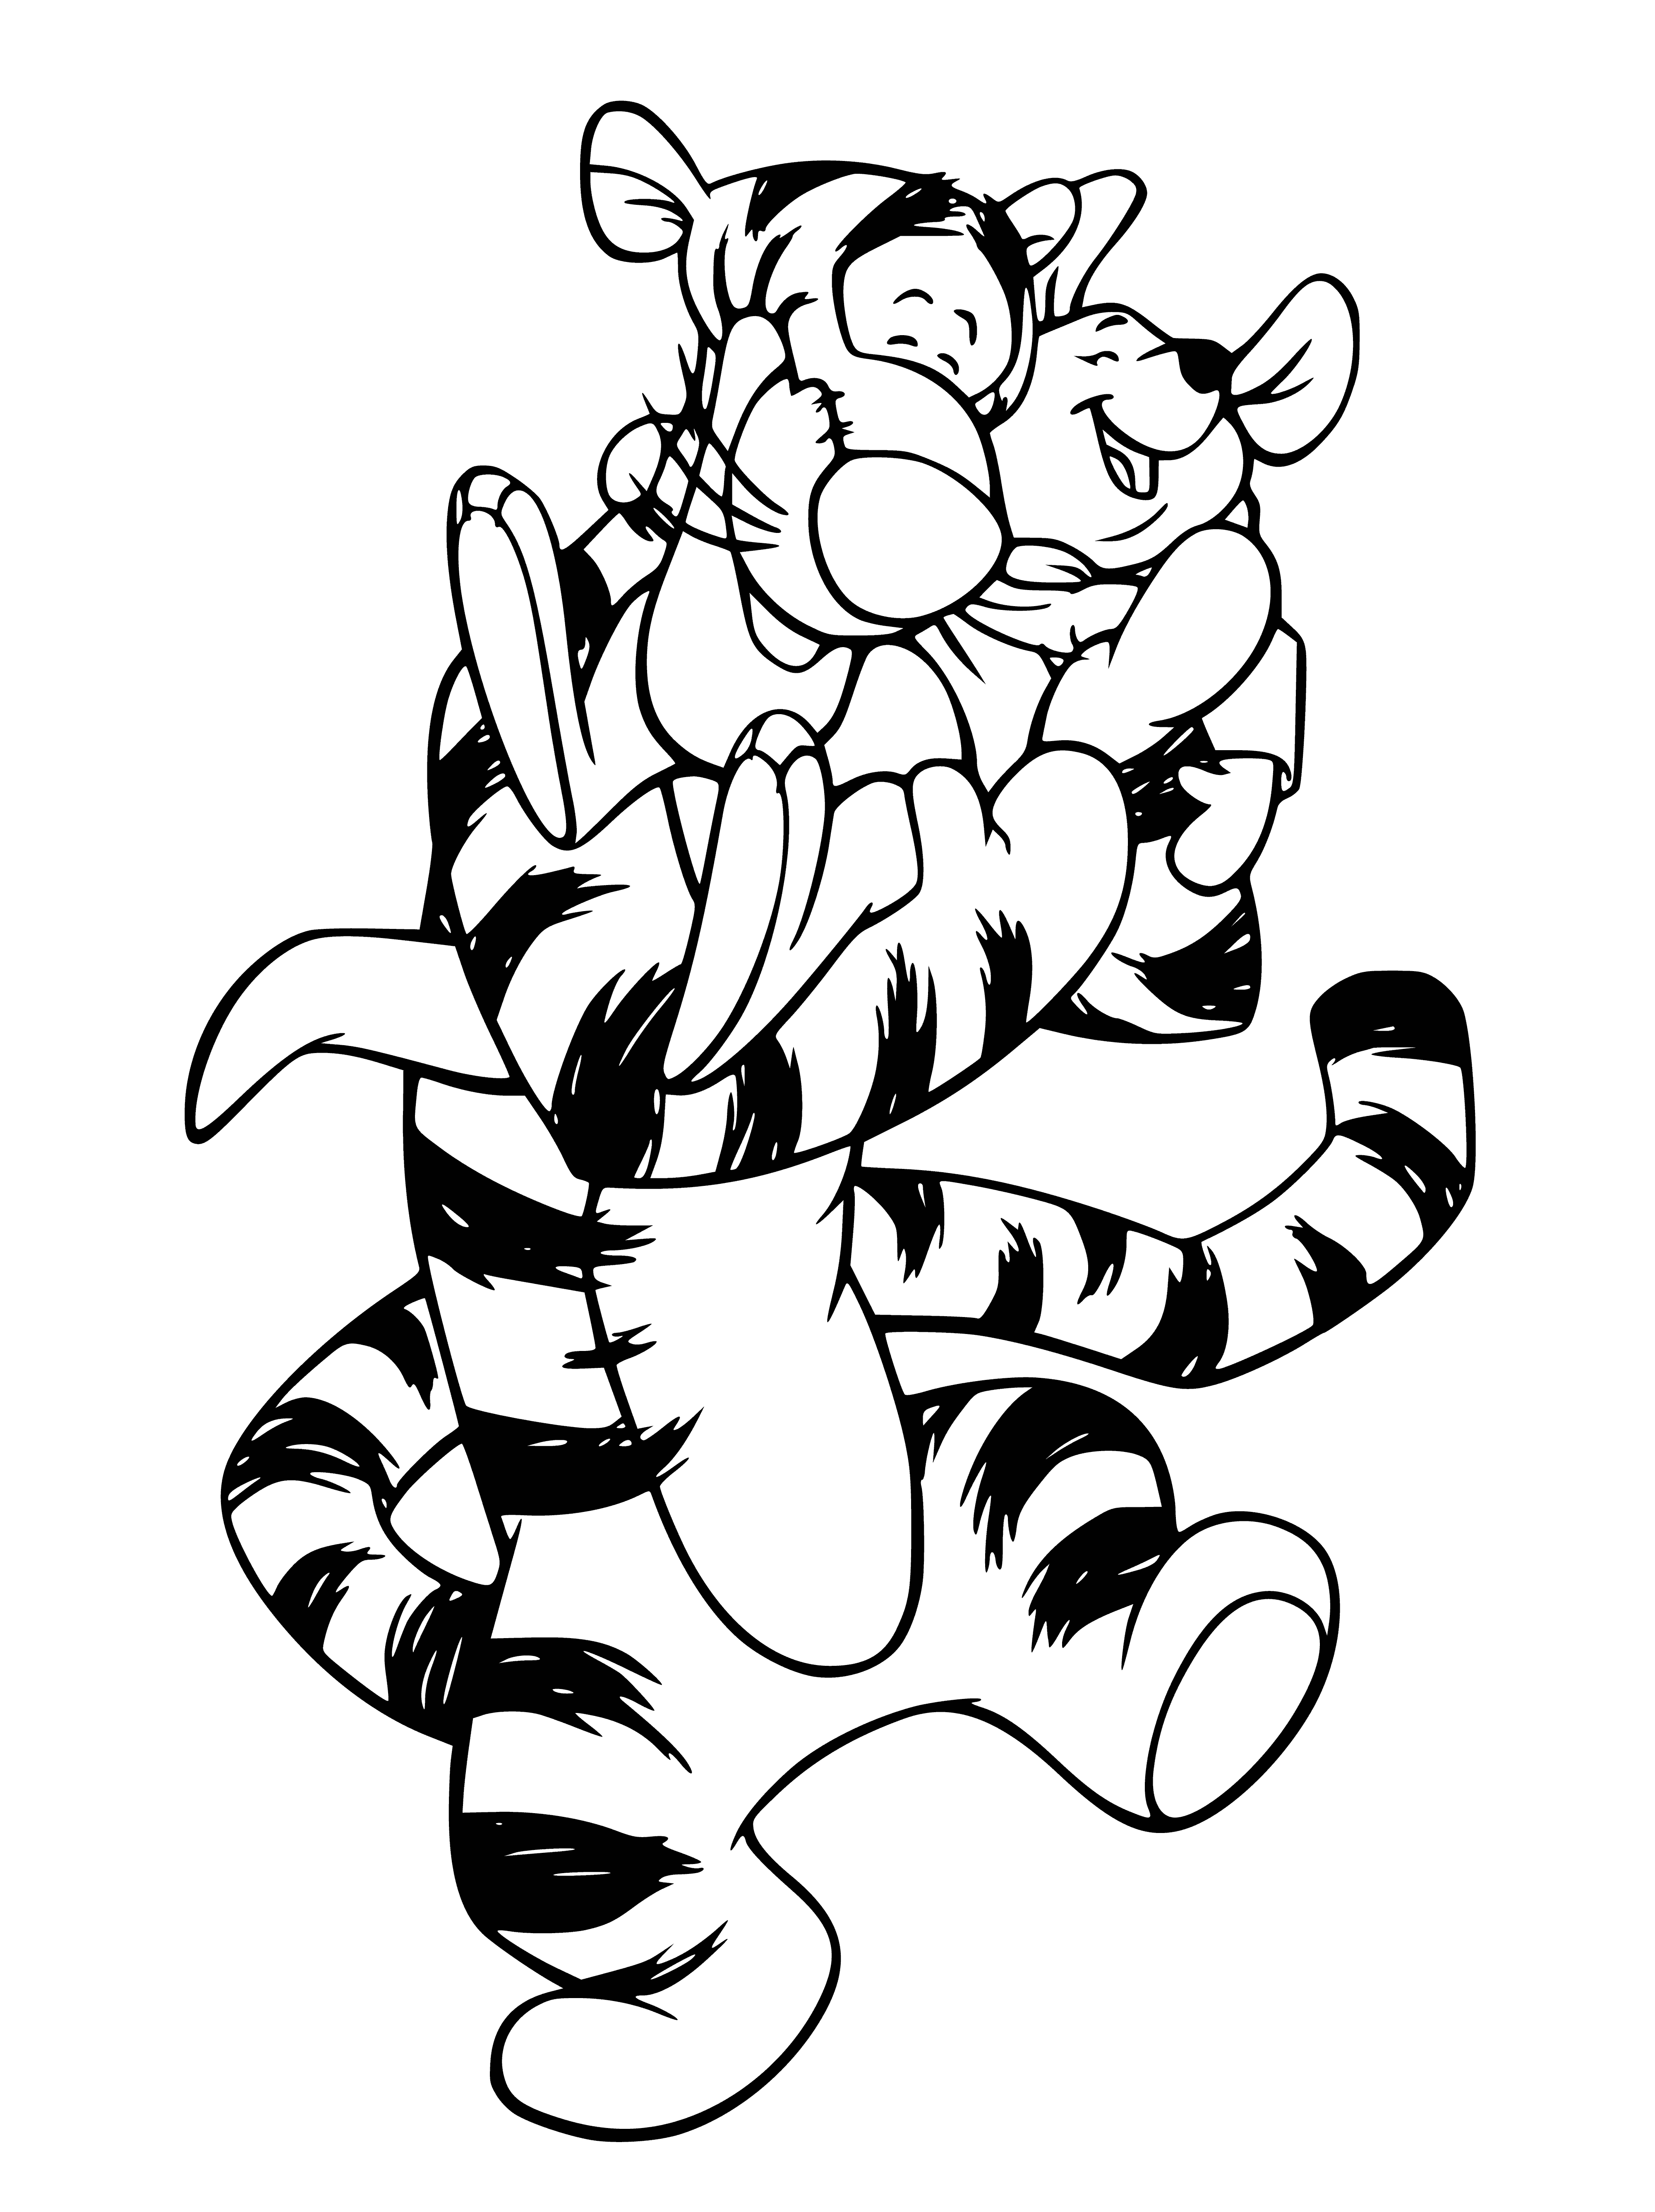 coloring page: Tigger cuddles Roo, Roo giggles and kicks as they enjoy each other's company. Both smiling.